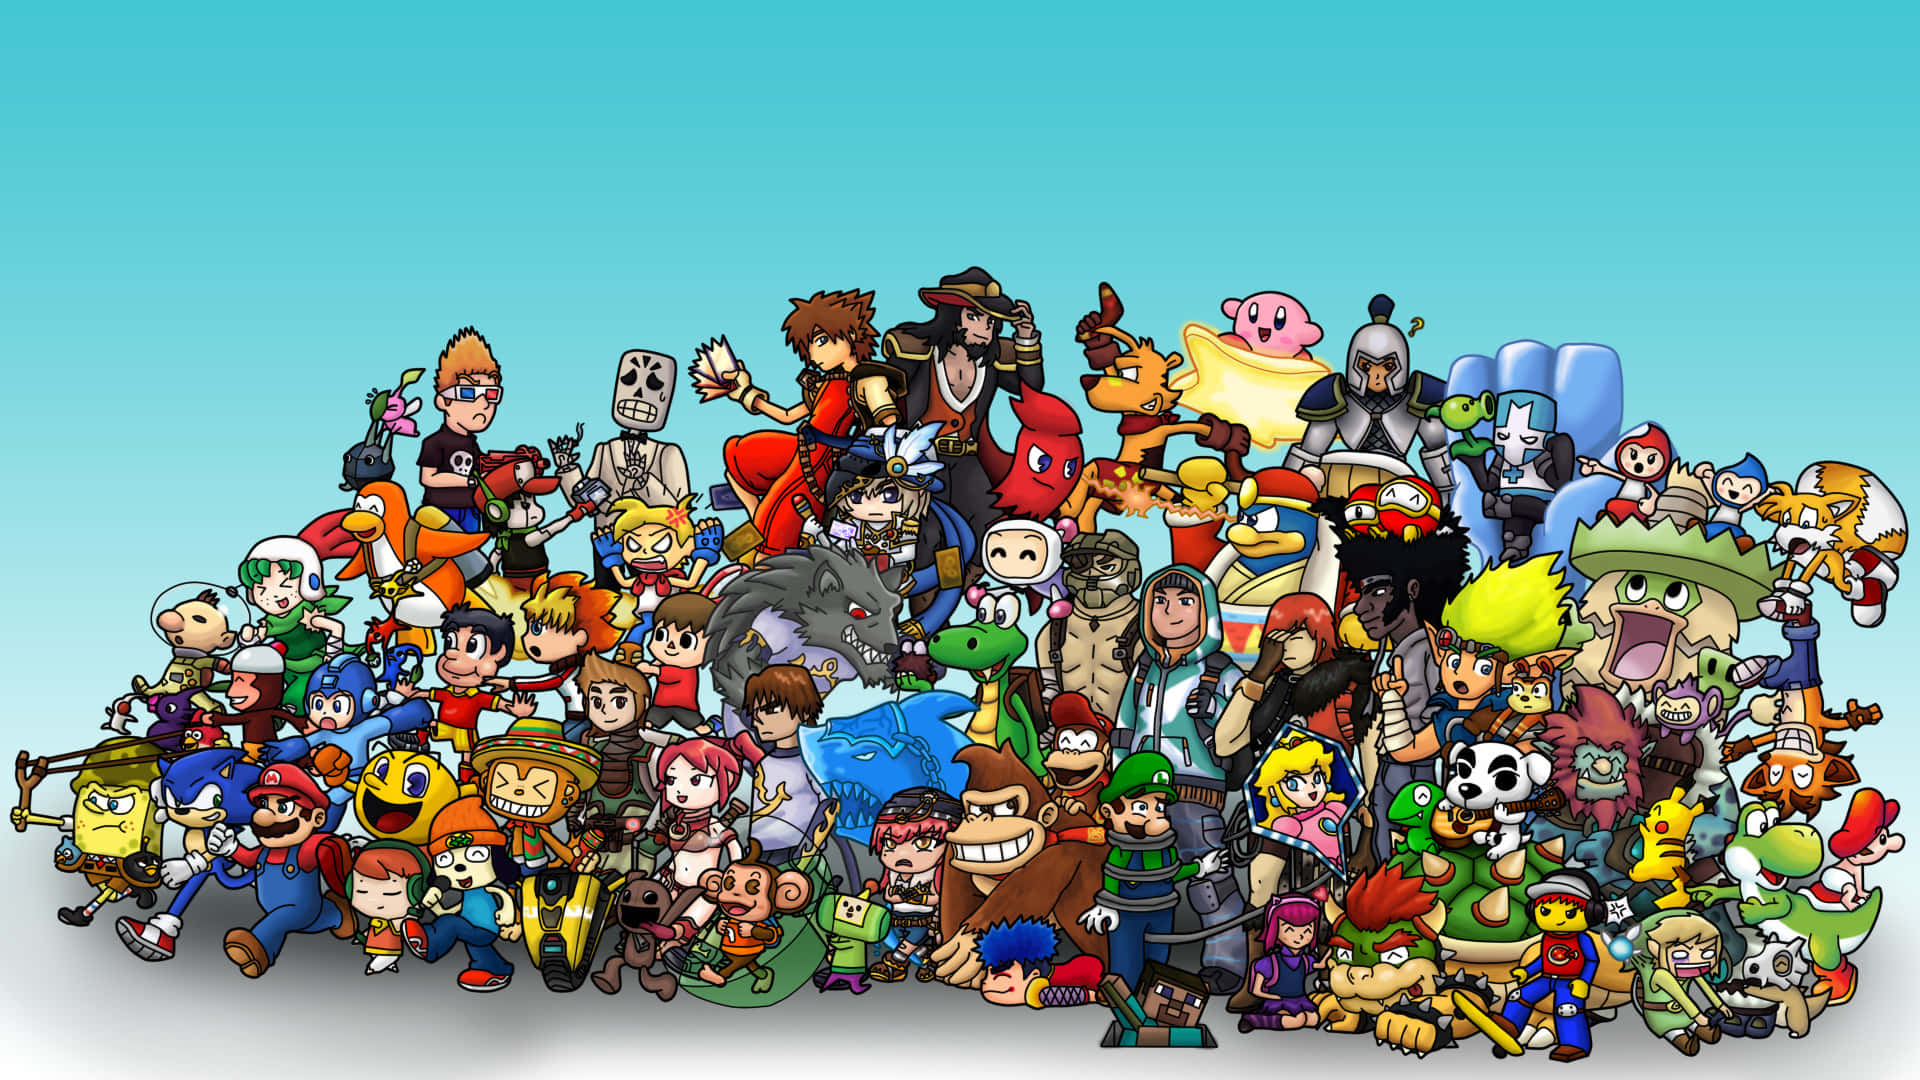 Celebrating Classic Gaming with Collections Wallpaper